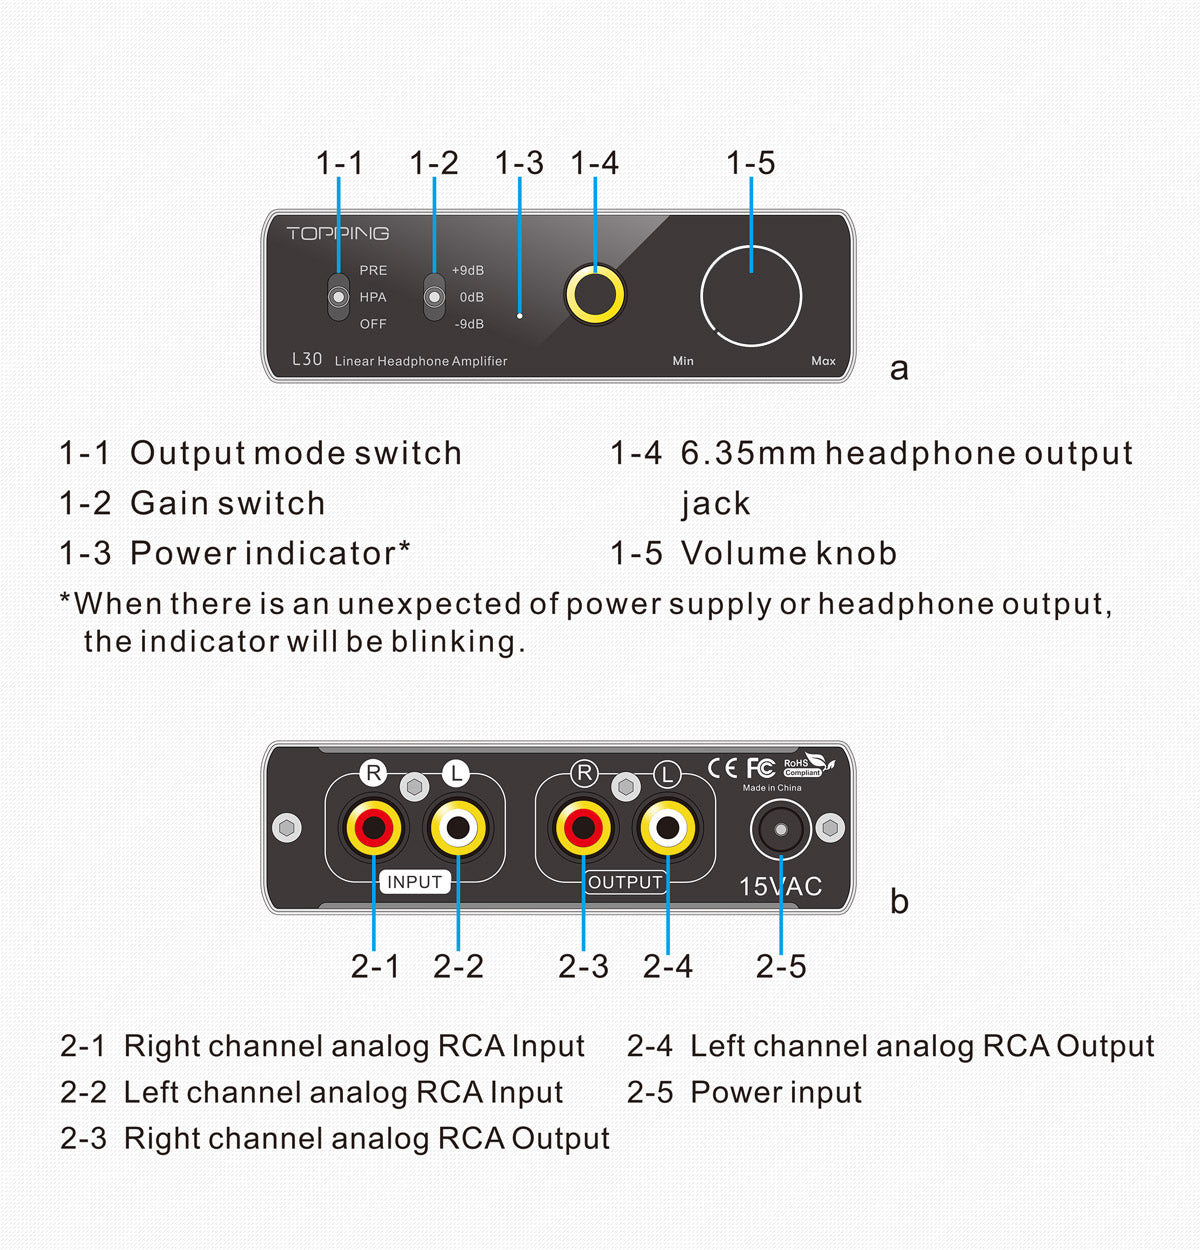 TOPPING L30 headphone amplifier inputs and outputs